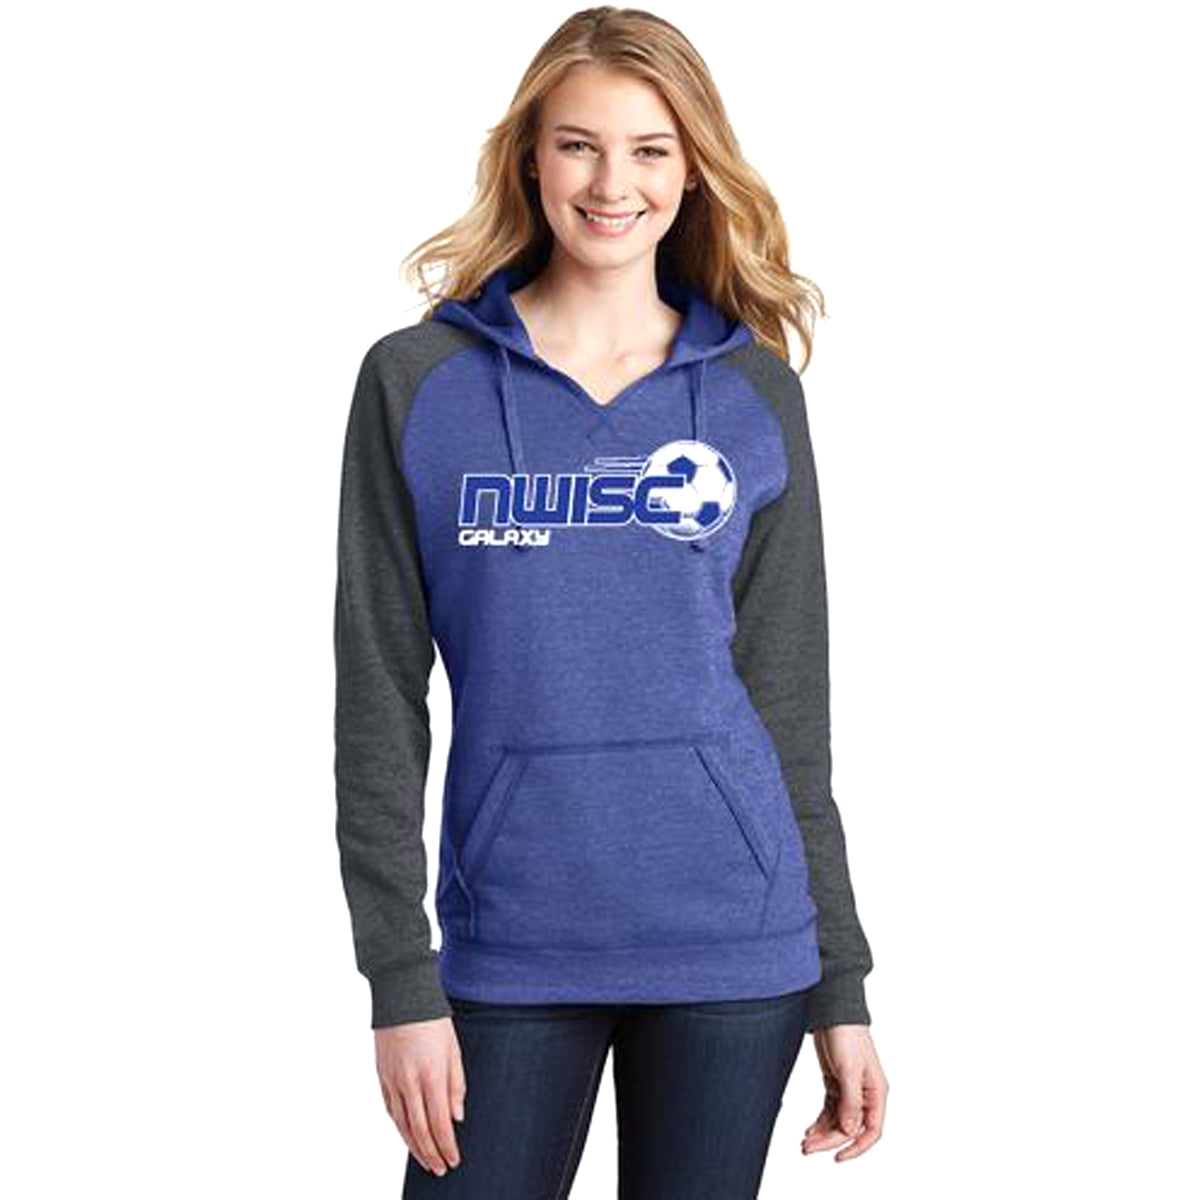 NWISC Galaxy Women&#39;s District Hooded Sweatshirt Hooded Sweatshirt Goal Kick Soccer Womens XS 